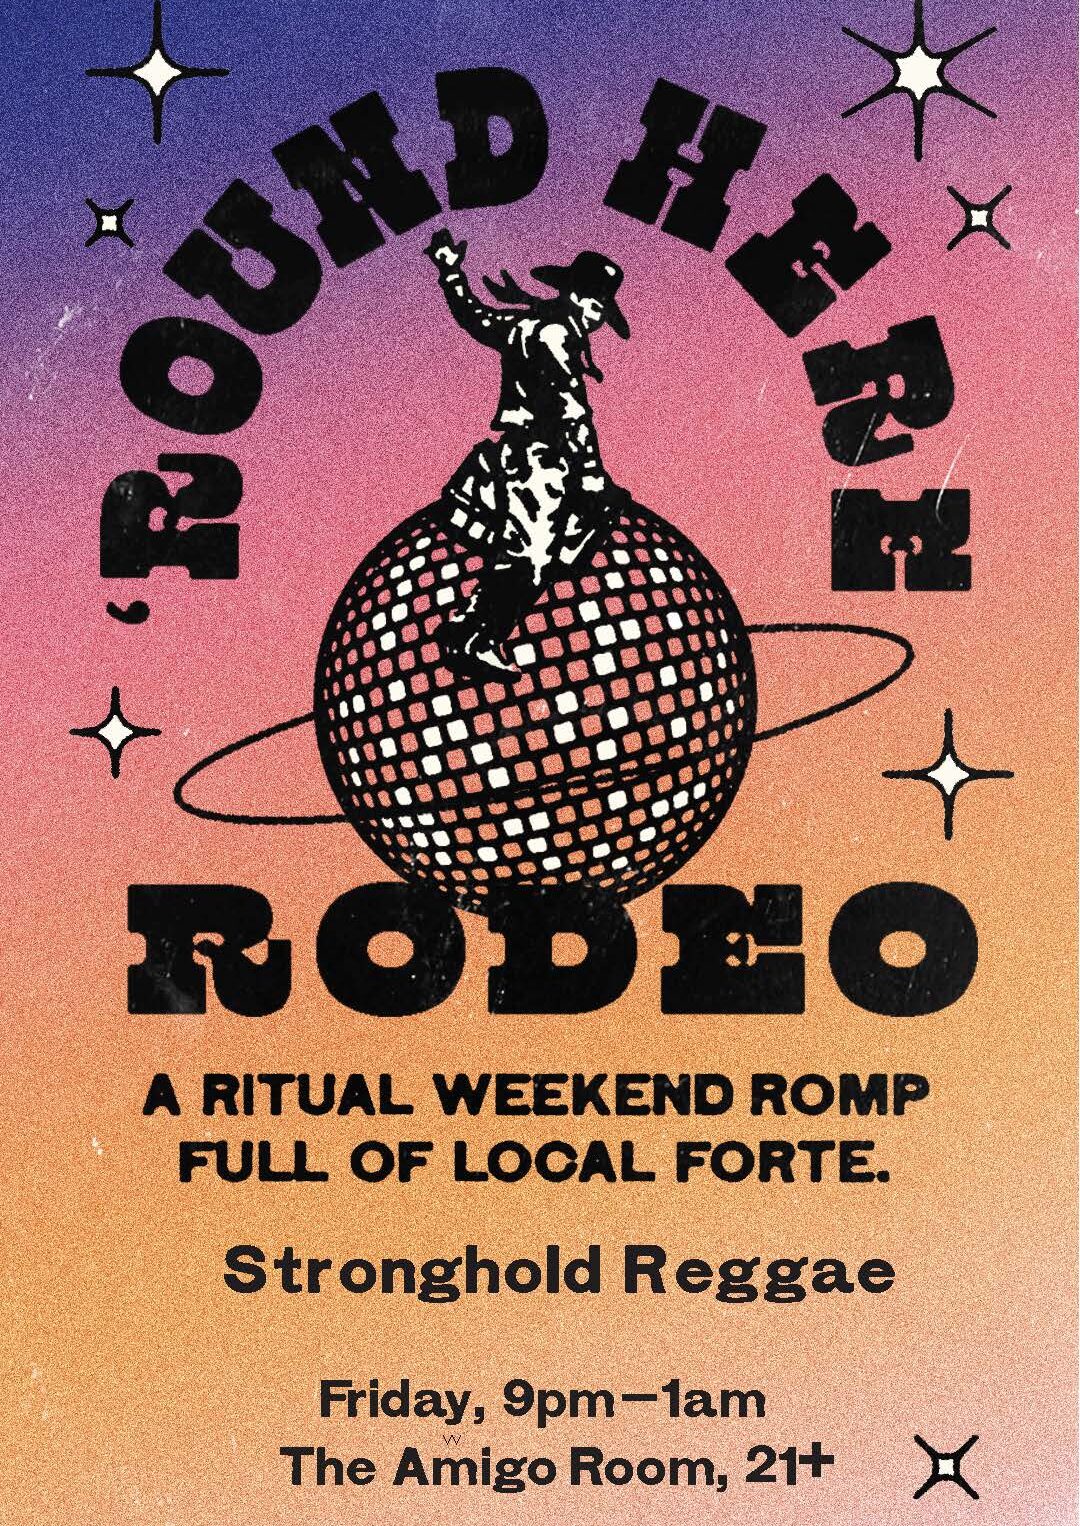 Round Here Rodeo Presents: Stronghold Reggae